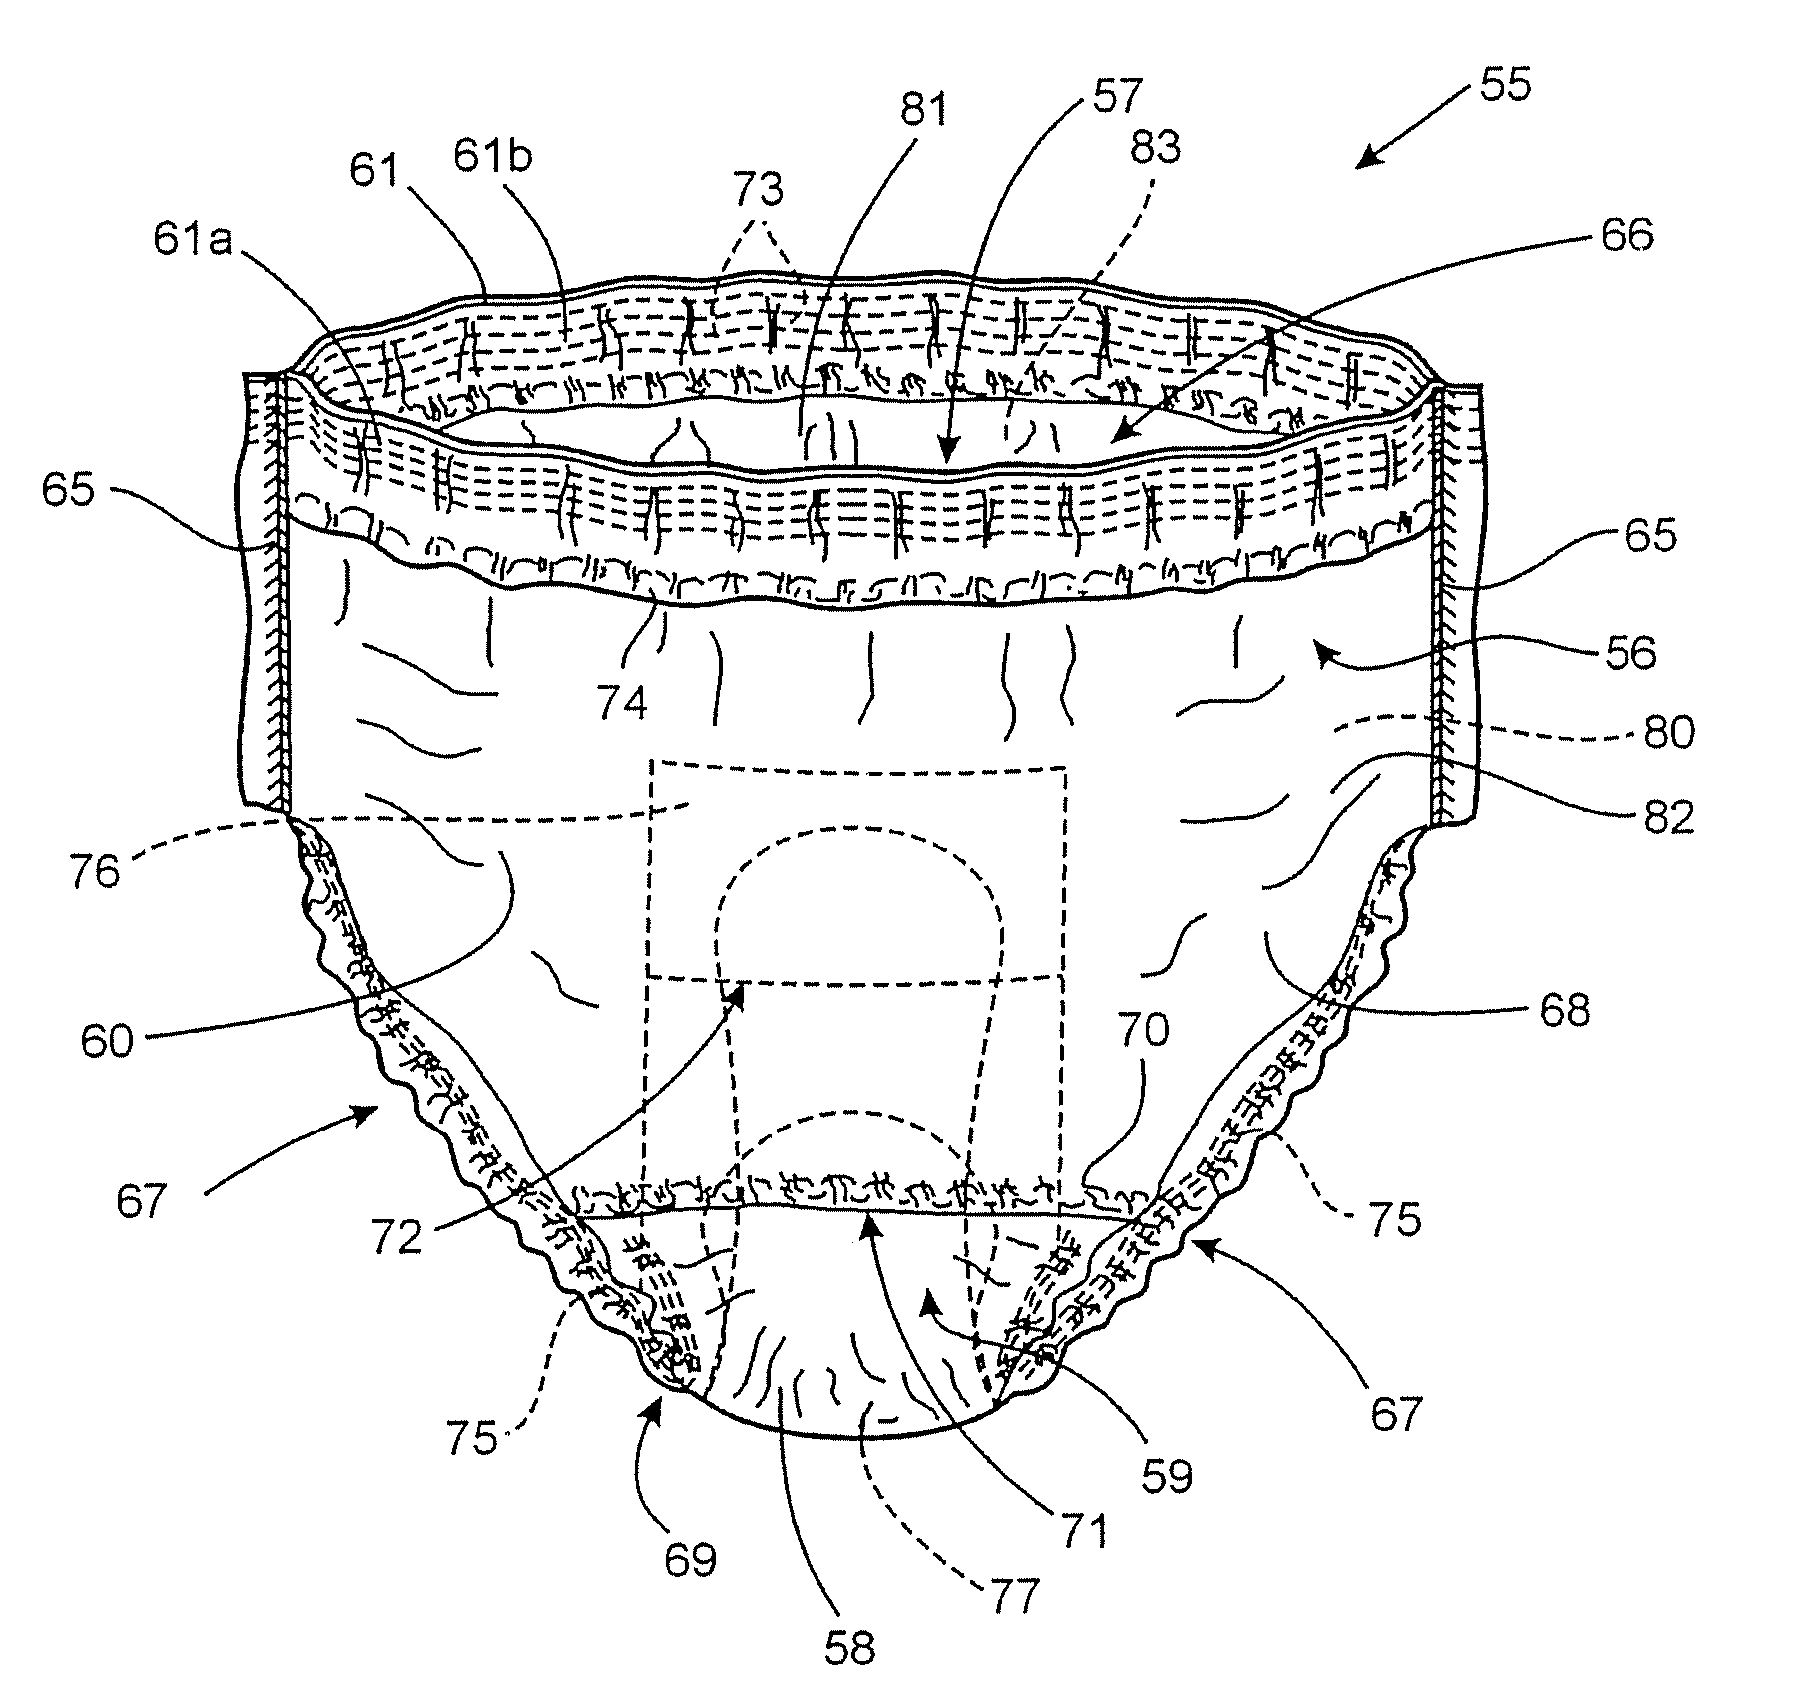 Pant-type absorbent article and a method for producing pant-type absorbent articles